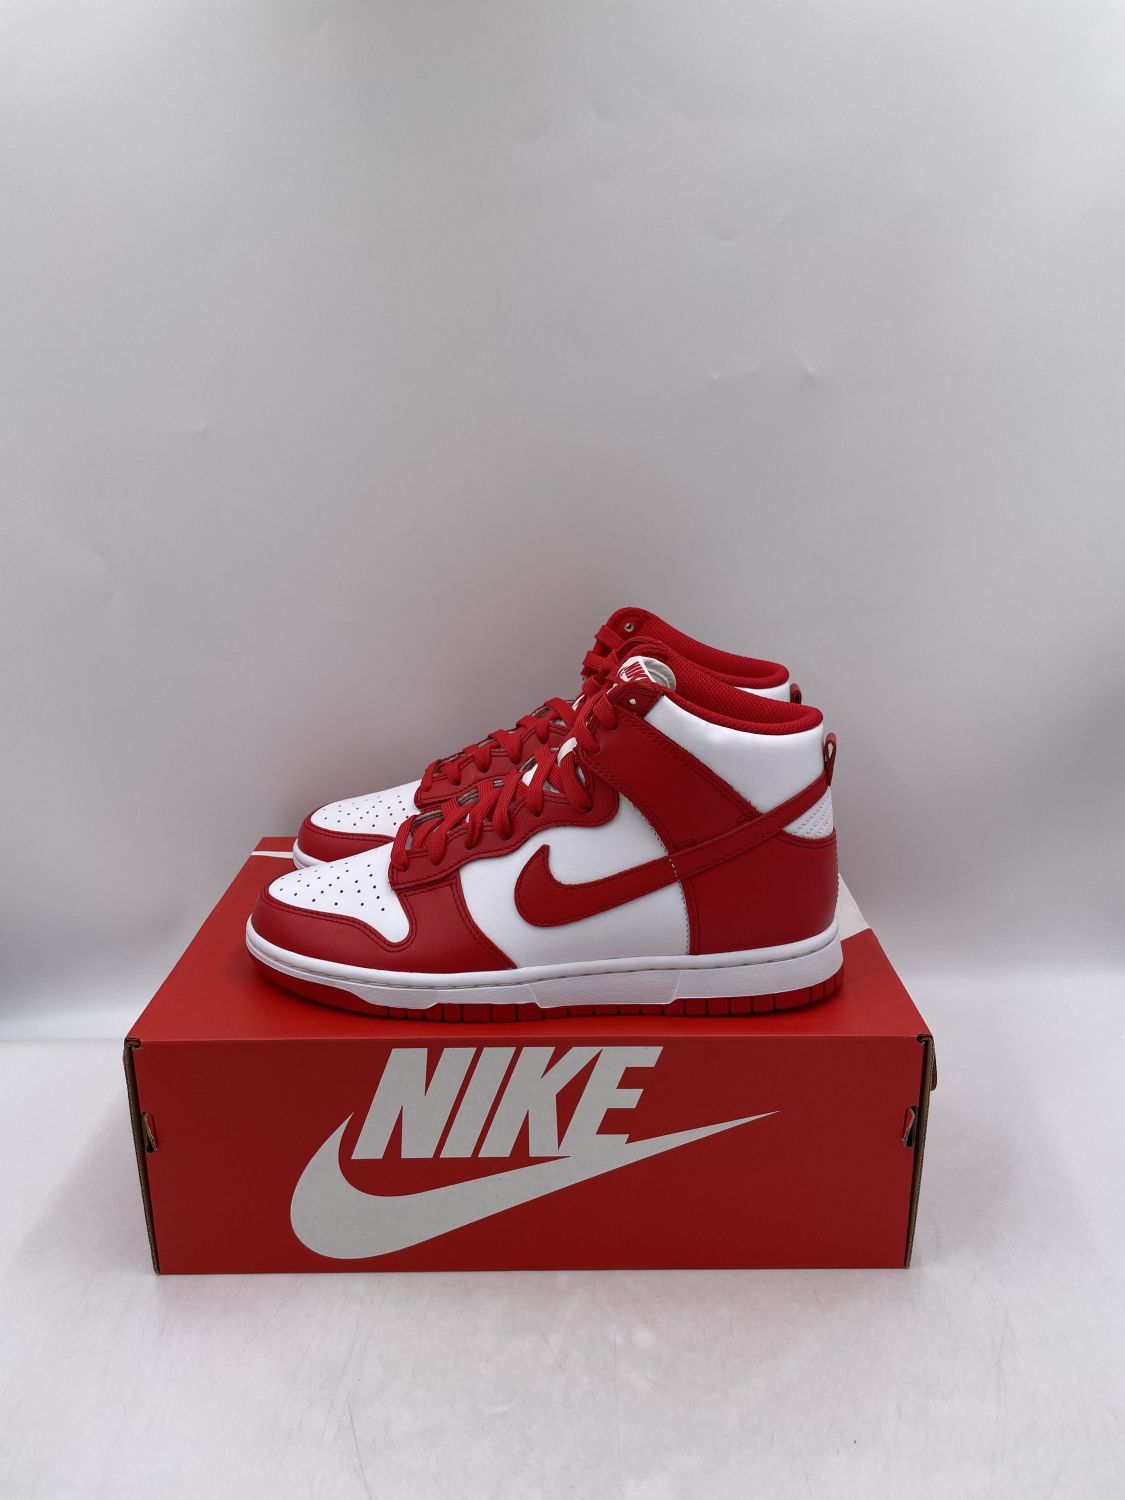 Nike Dunk High Championship White Red | AfterMarket